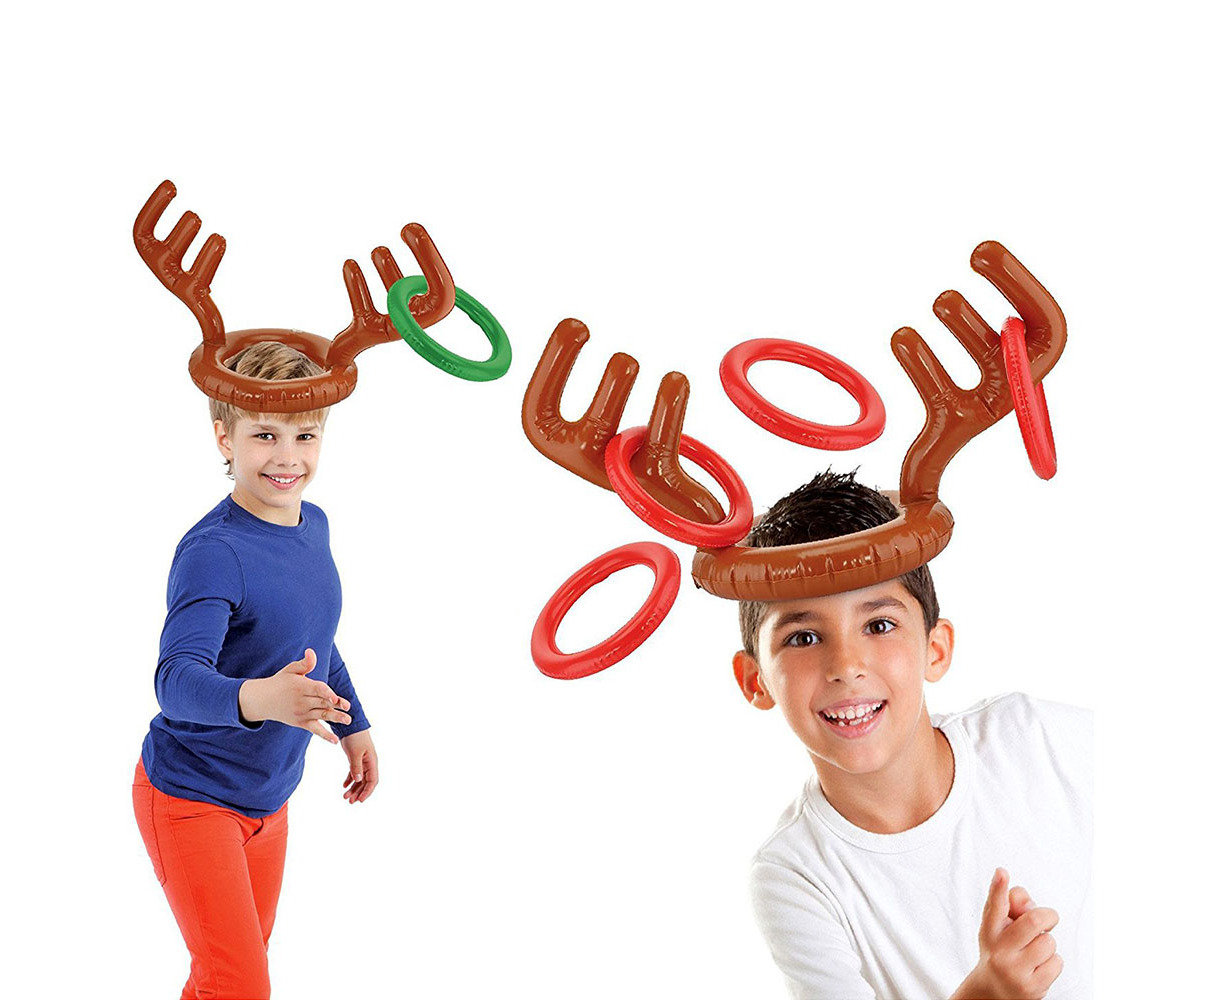 Easyme 3 Set Christmas Inflatable Reindeer Antler Hat Rings with Rings Toss Game Xmas Fun Games for Christmas Family Party Games 